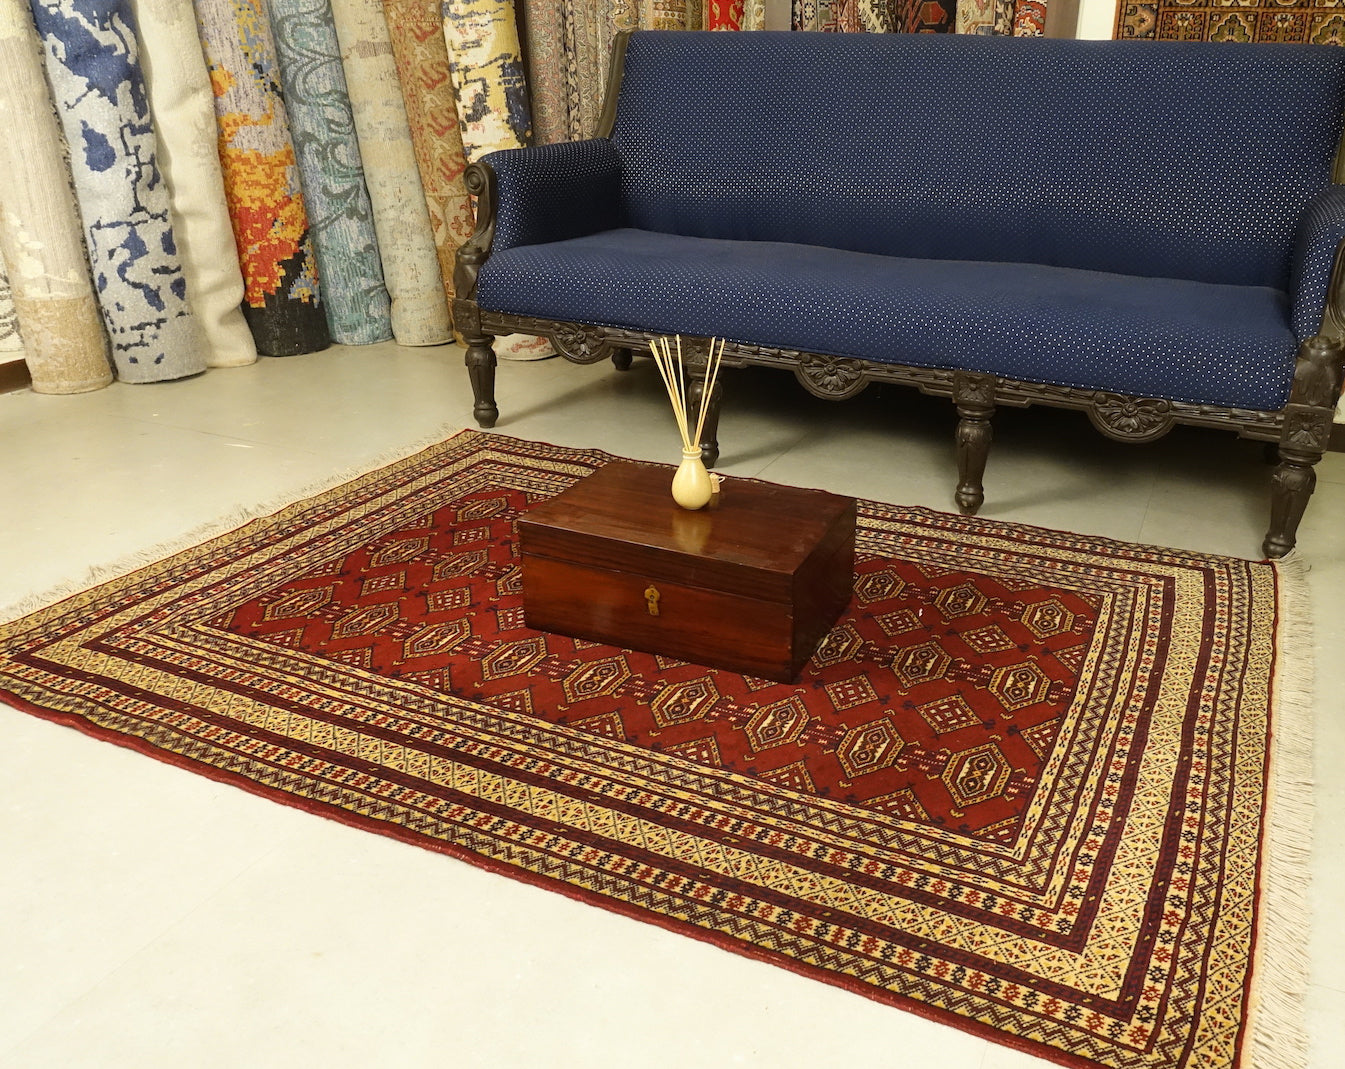 A 4 by 6 feet afghani wool rug. The colours used on the carpet are red, tan, deep blue and beige.